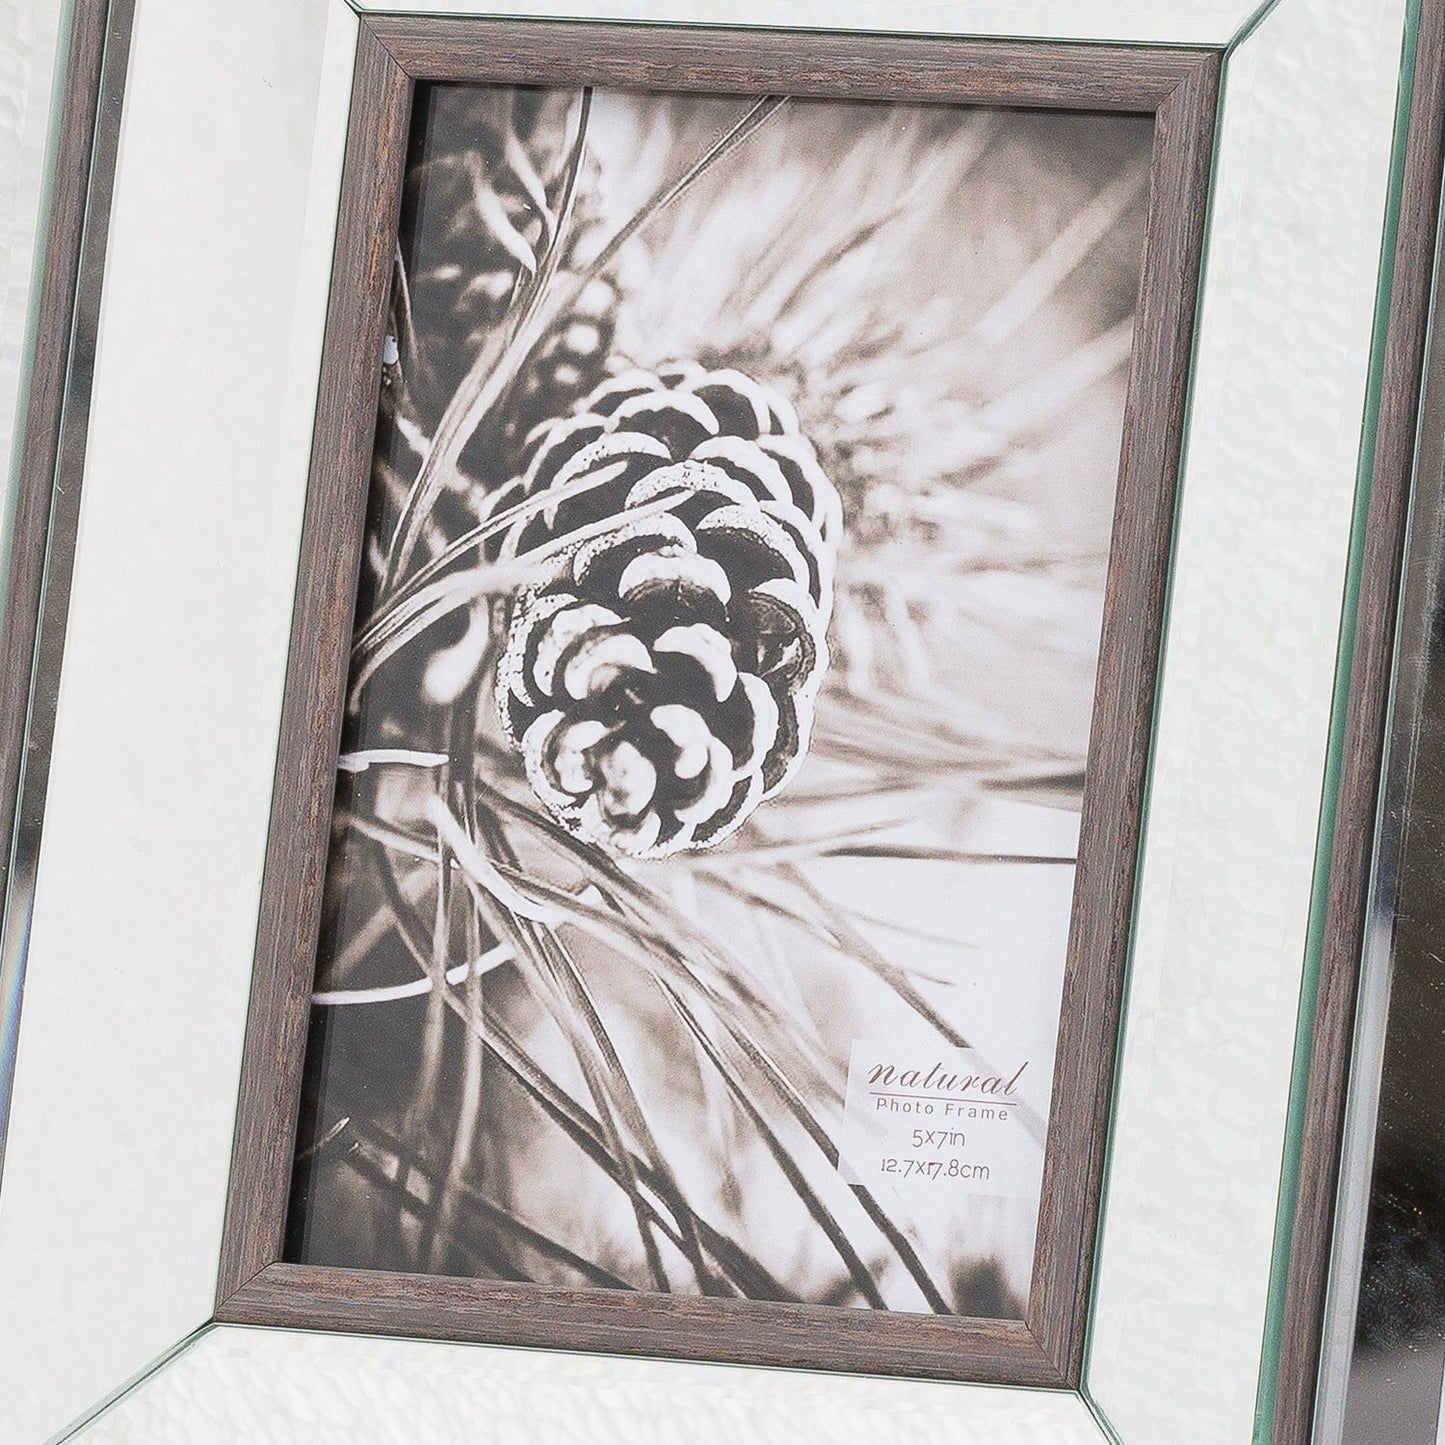 Mirrored glass photo frame with bevelled design size 5x7